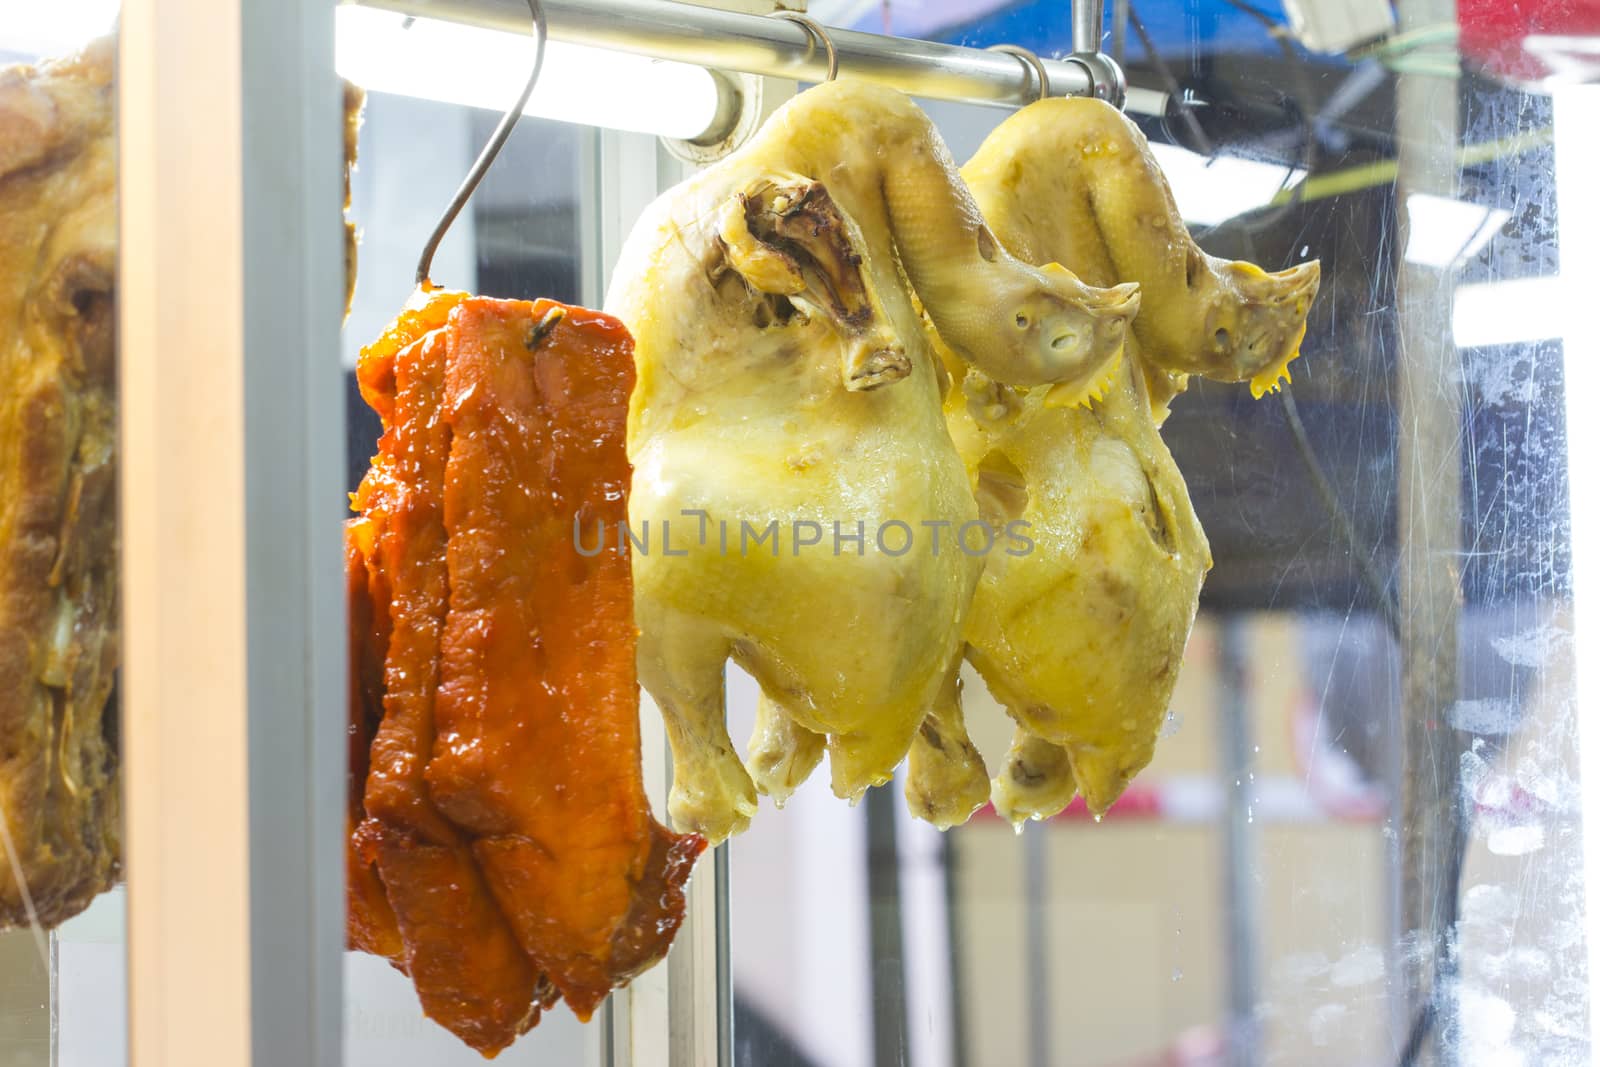 Boiled chickens and cooked red pork - Popular Thailand food